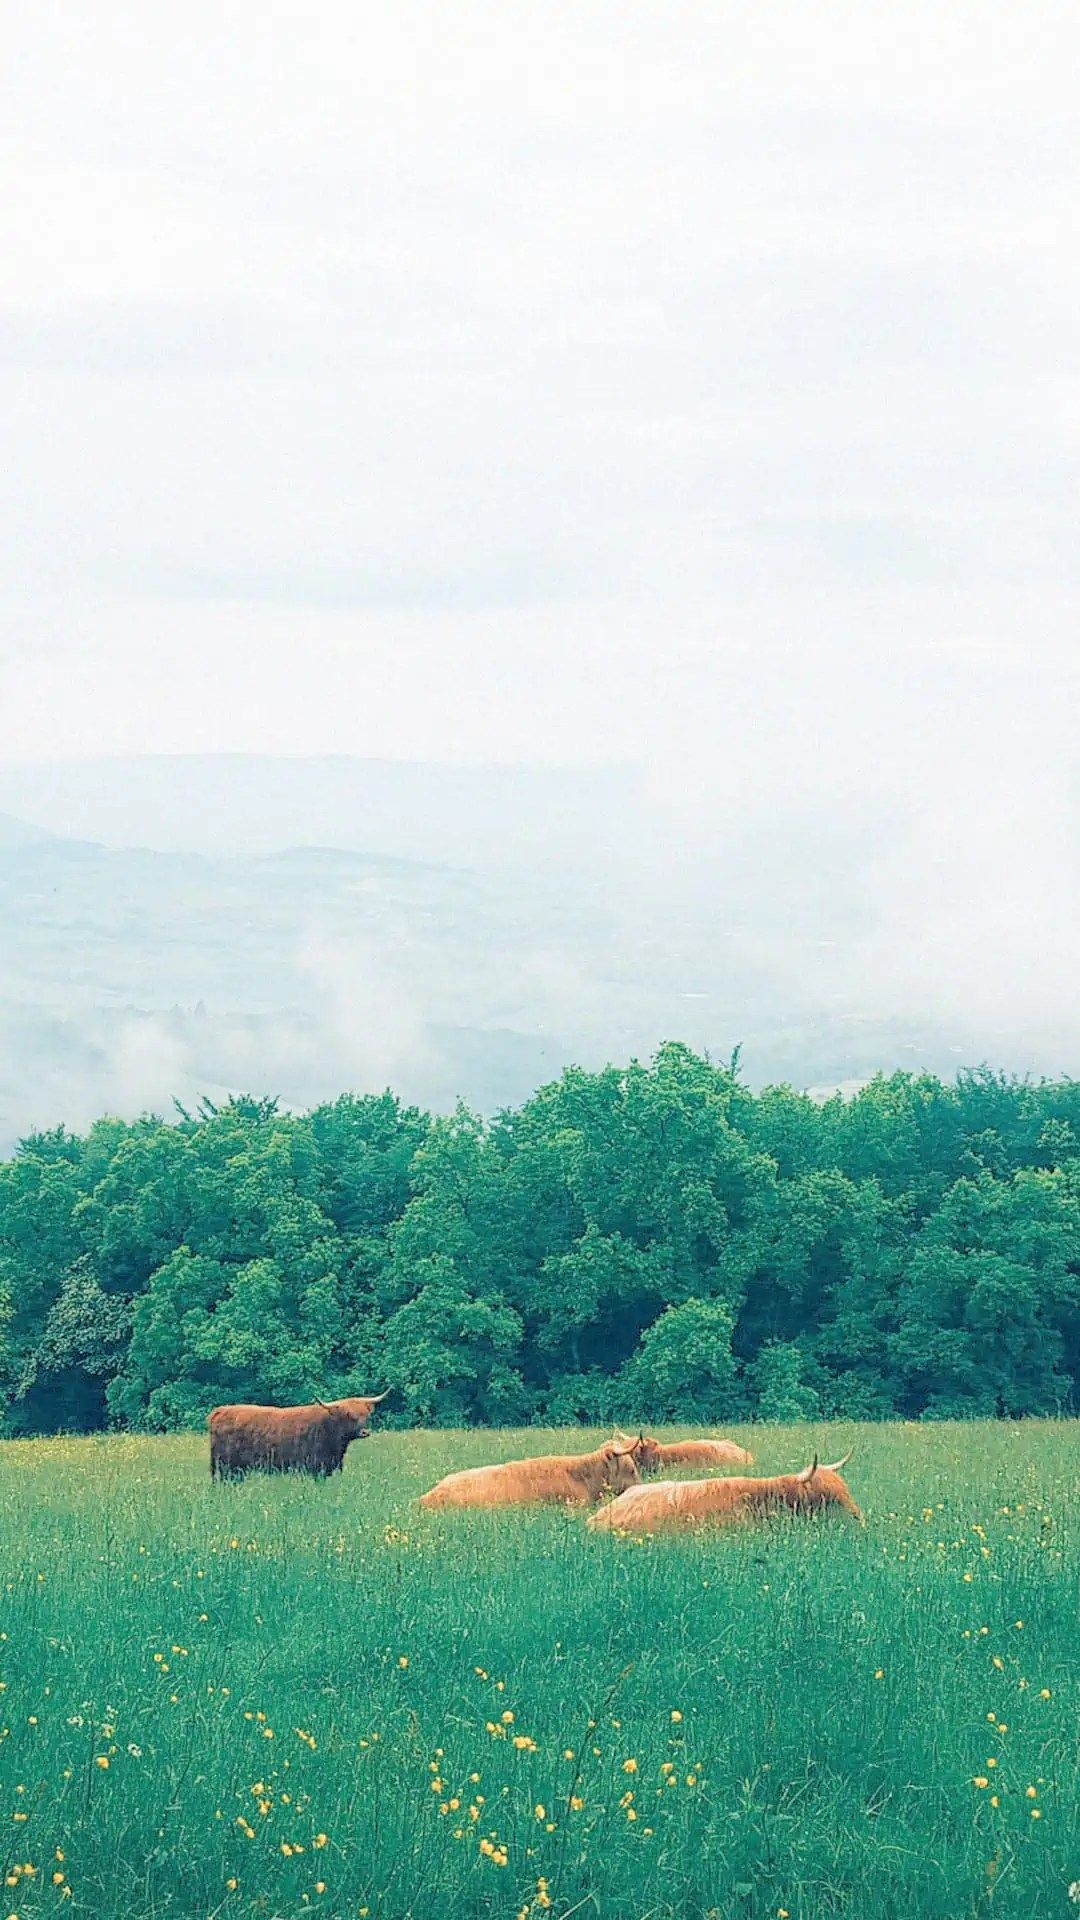 IPhone wallpaper of a herd of cattle in a field of grass - Cottagecore